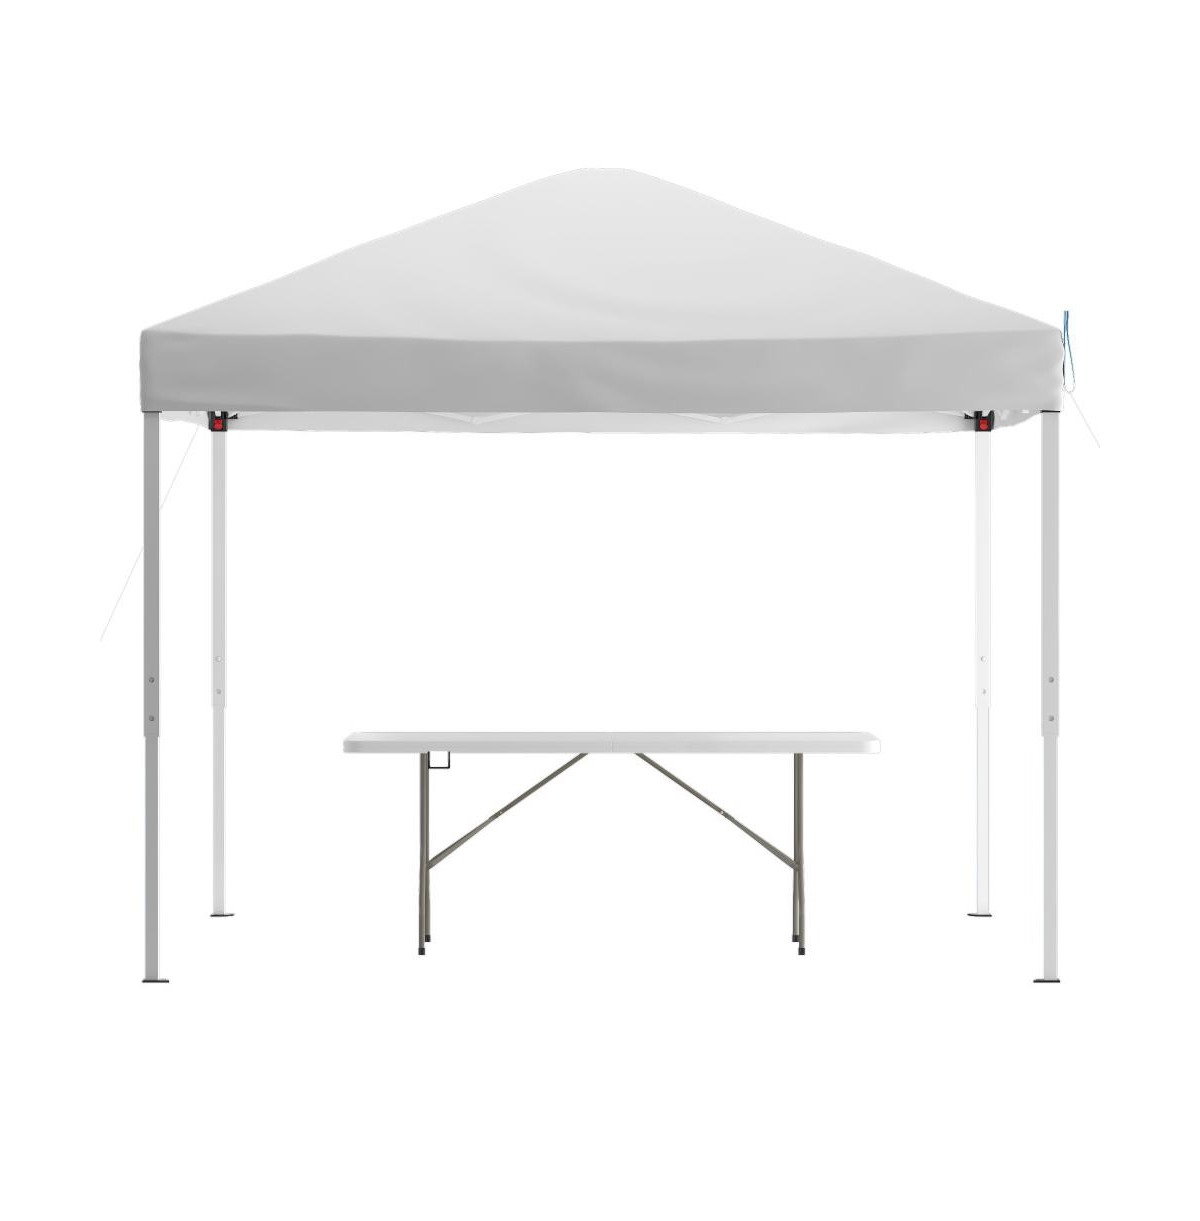 Outdoor Event/Tailgate Tent Set With Pop Up Event Canopy And Carry Bag And Bi-Fold Table With Carrying Handle - White